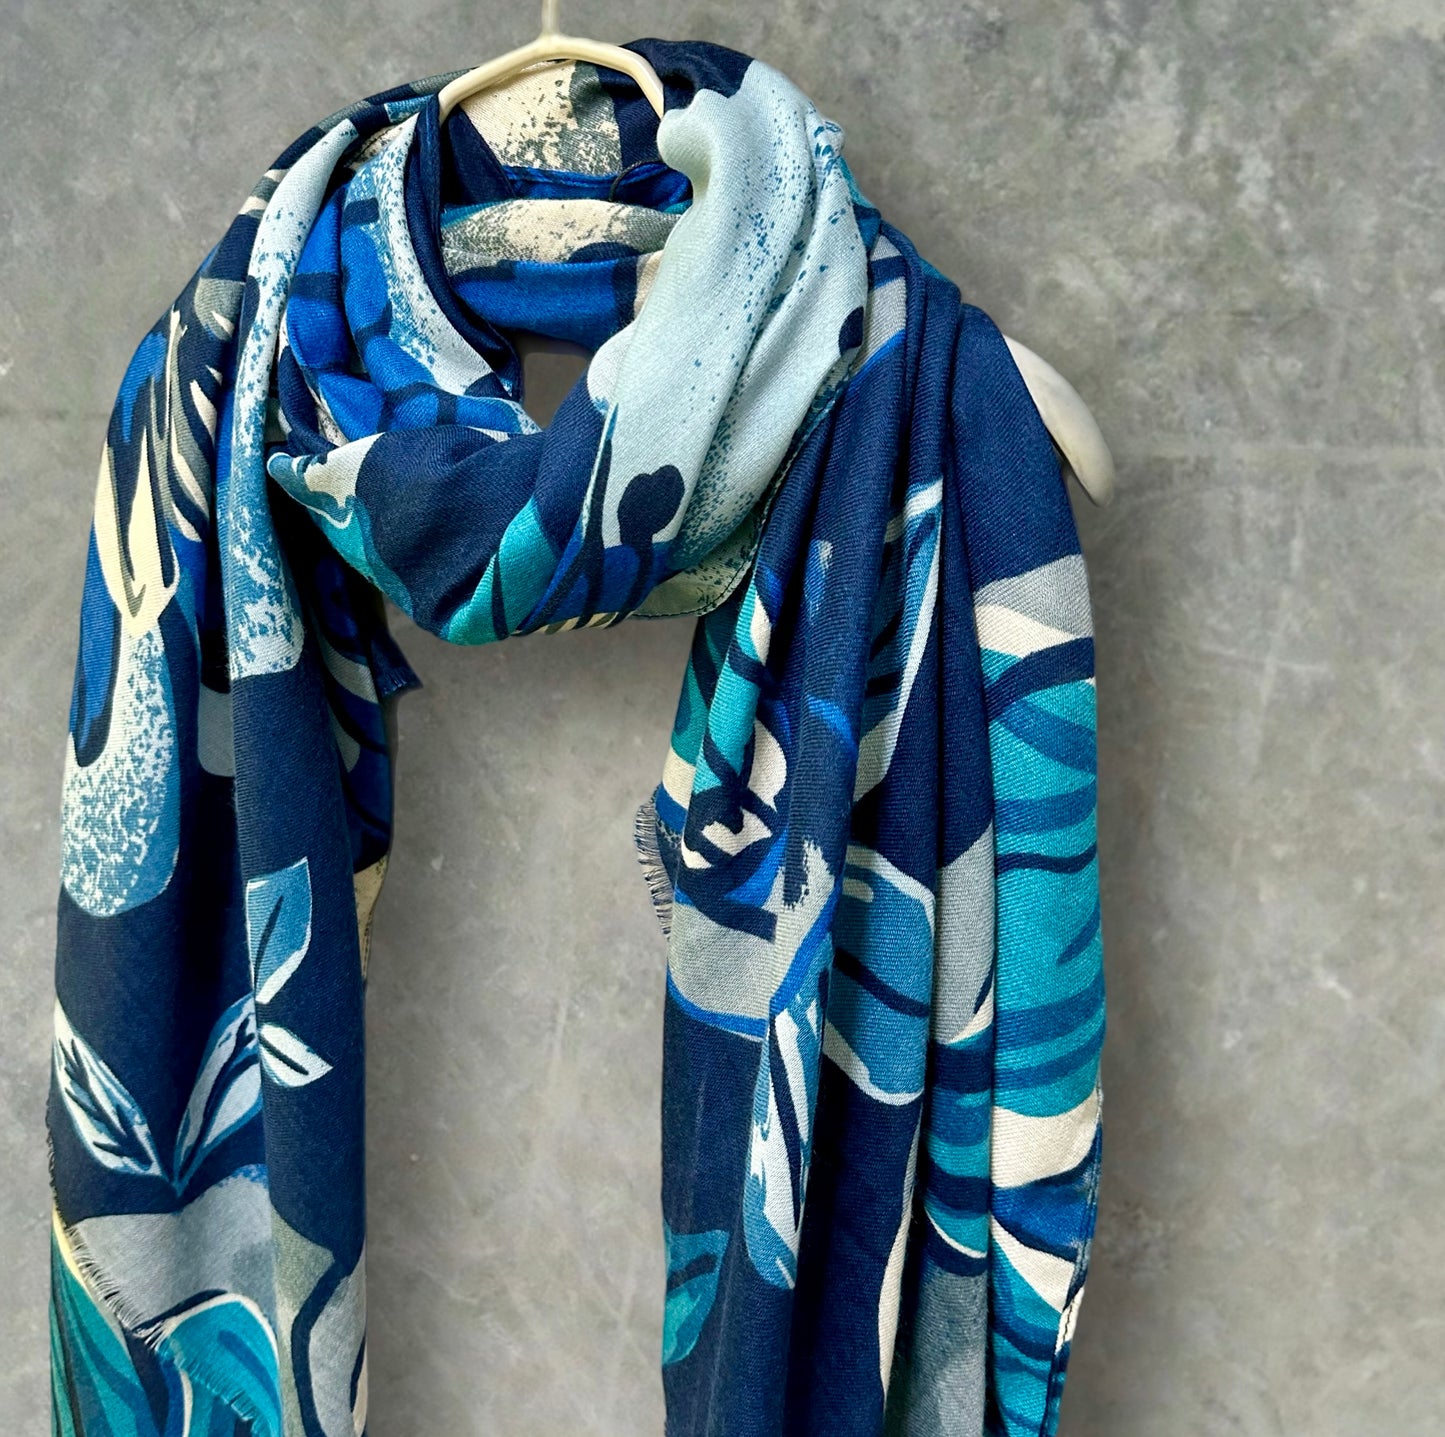 Vintage Inspired Blue Floral Scarf for Women,Perfect All-Year Accessory,Ideal Grey Gifts for Mother's Day,Birthday, and Christmas.